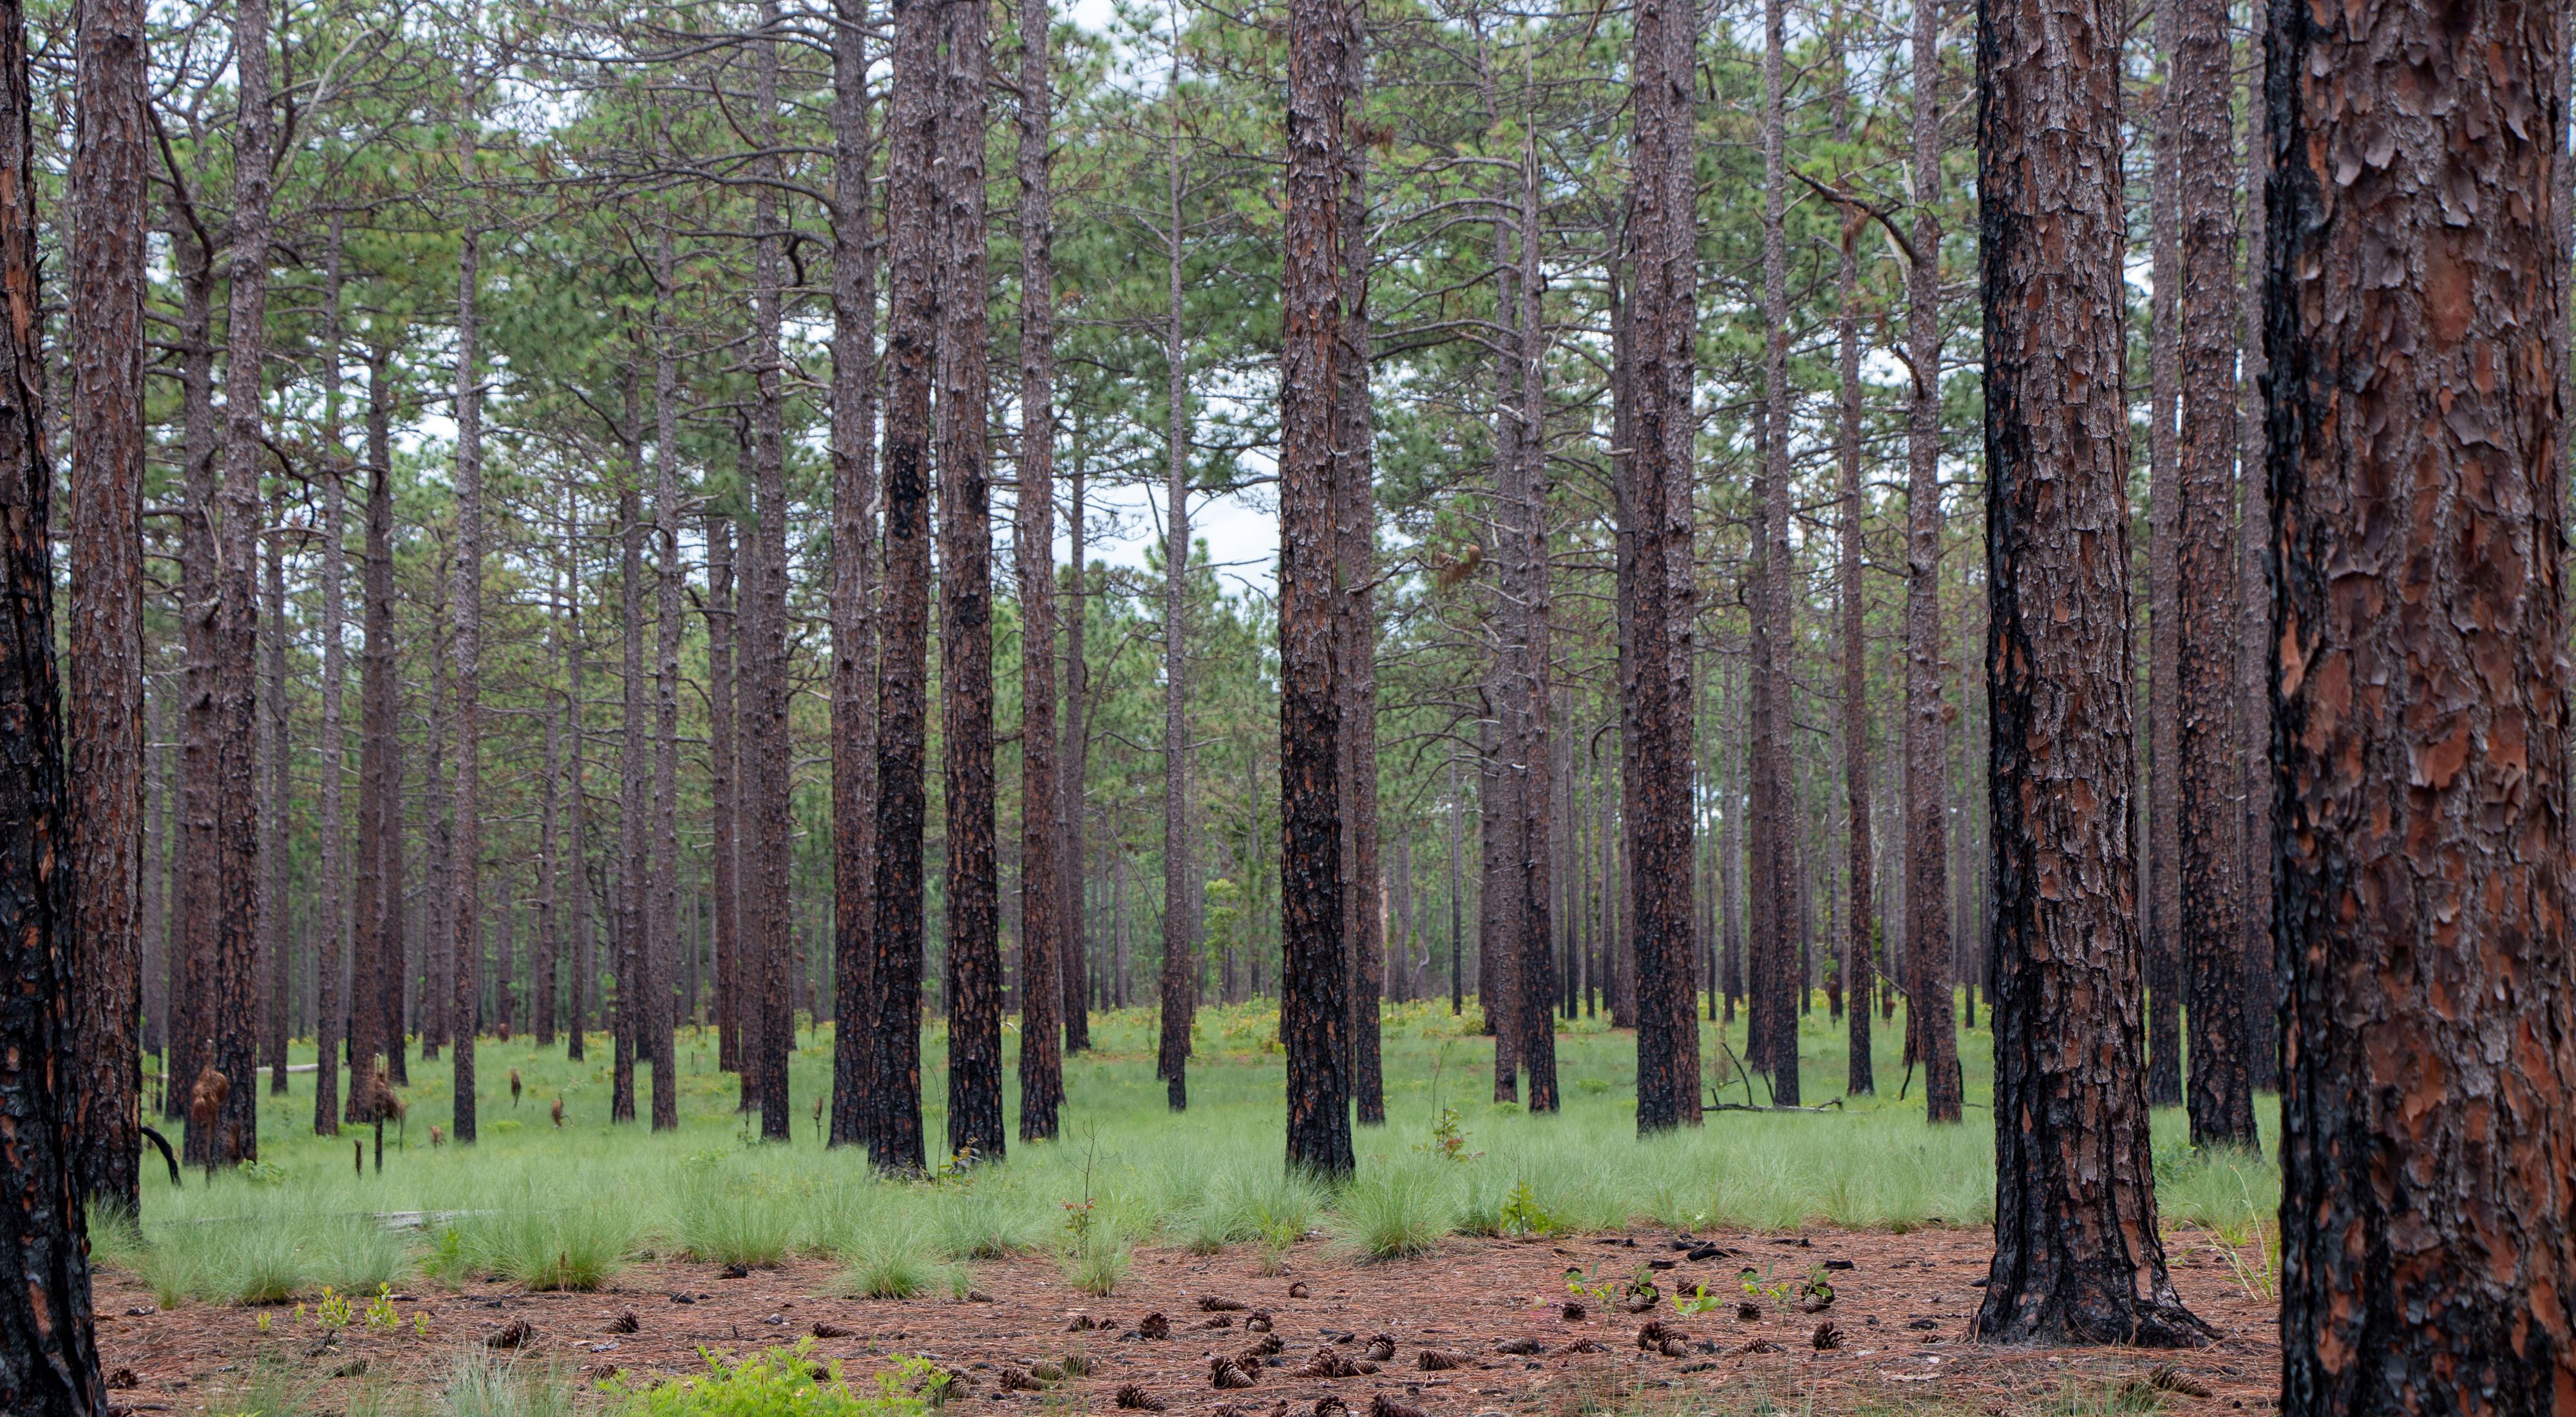 Looking into a forest of tall longleaf pine on a bright day.